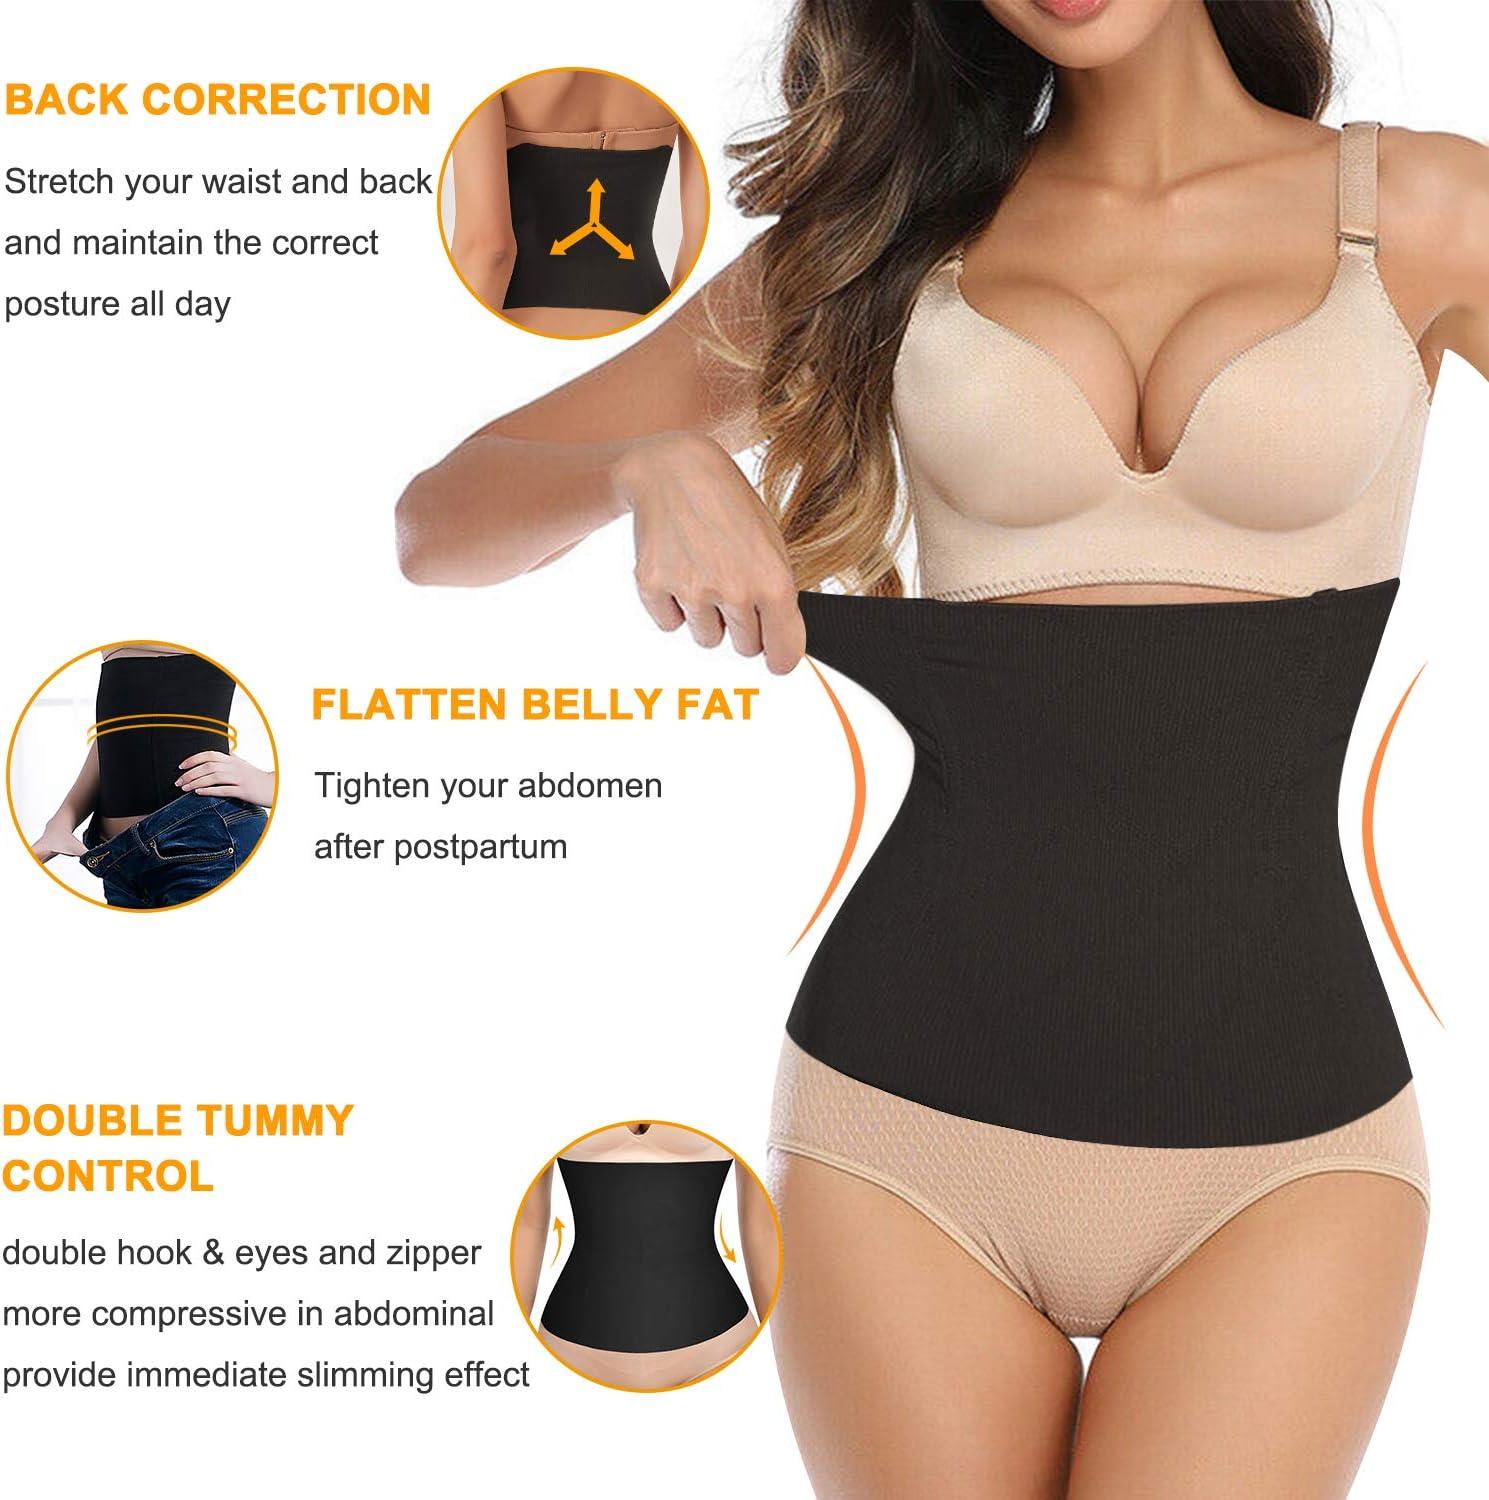 Bingrong 2 in 1 Waist Trainer for Women Postpartum Belly Band Maternity  Recovery Belt Seamless Girdle Tummy Control Body Shaper Shapewear Black S